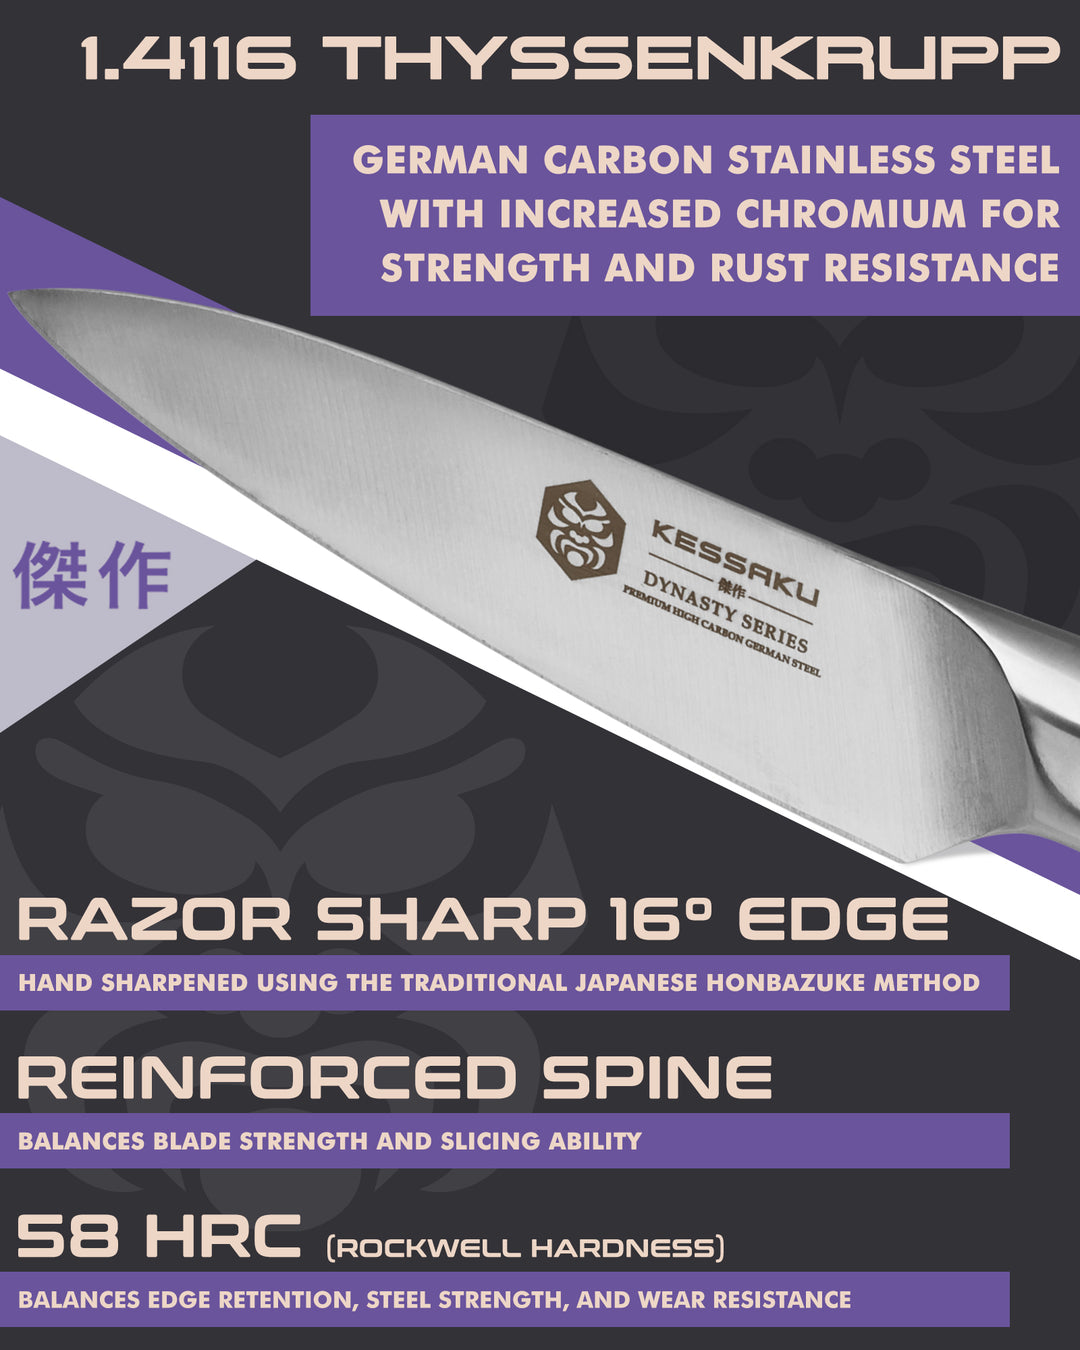 Kessaku Dynasty Paring Knife blade features: 1.4116 German steel, 58 HRC, sharpened to 16 degrees, reinforced spine